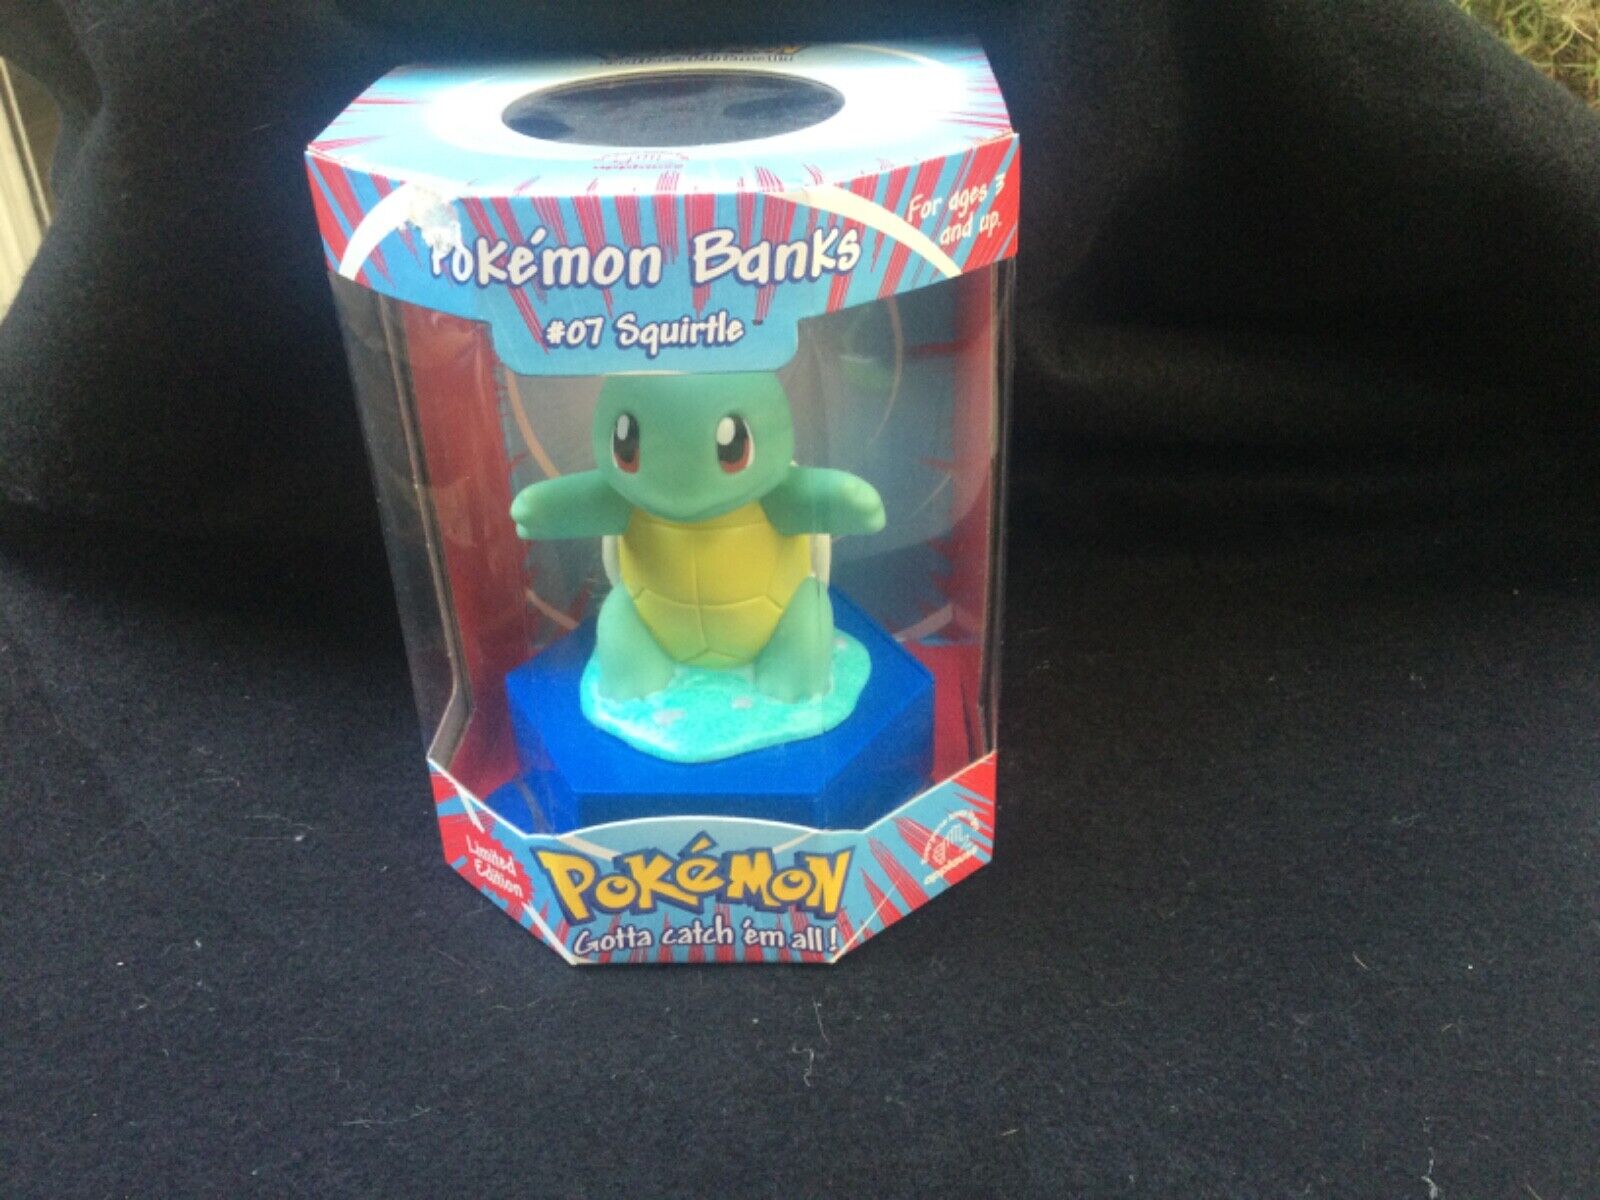 1998 APPLAUSE POKEMON BANKS #07 SQUIRTLE LIMITED EDITION BANK NEW SEALED VINTAGE